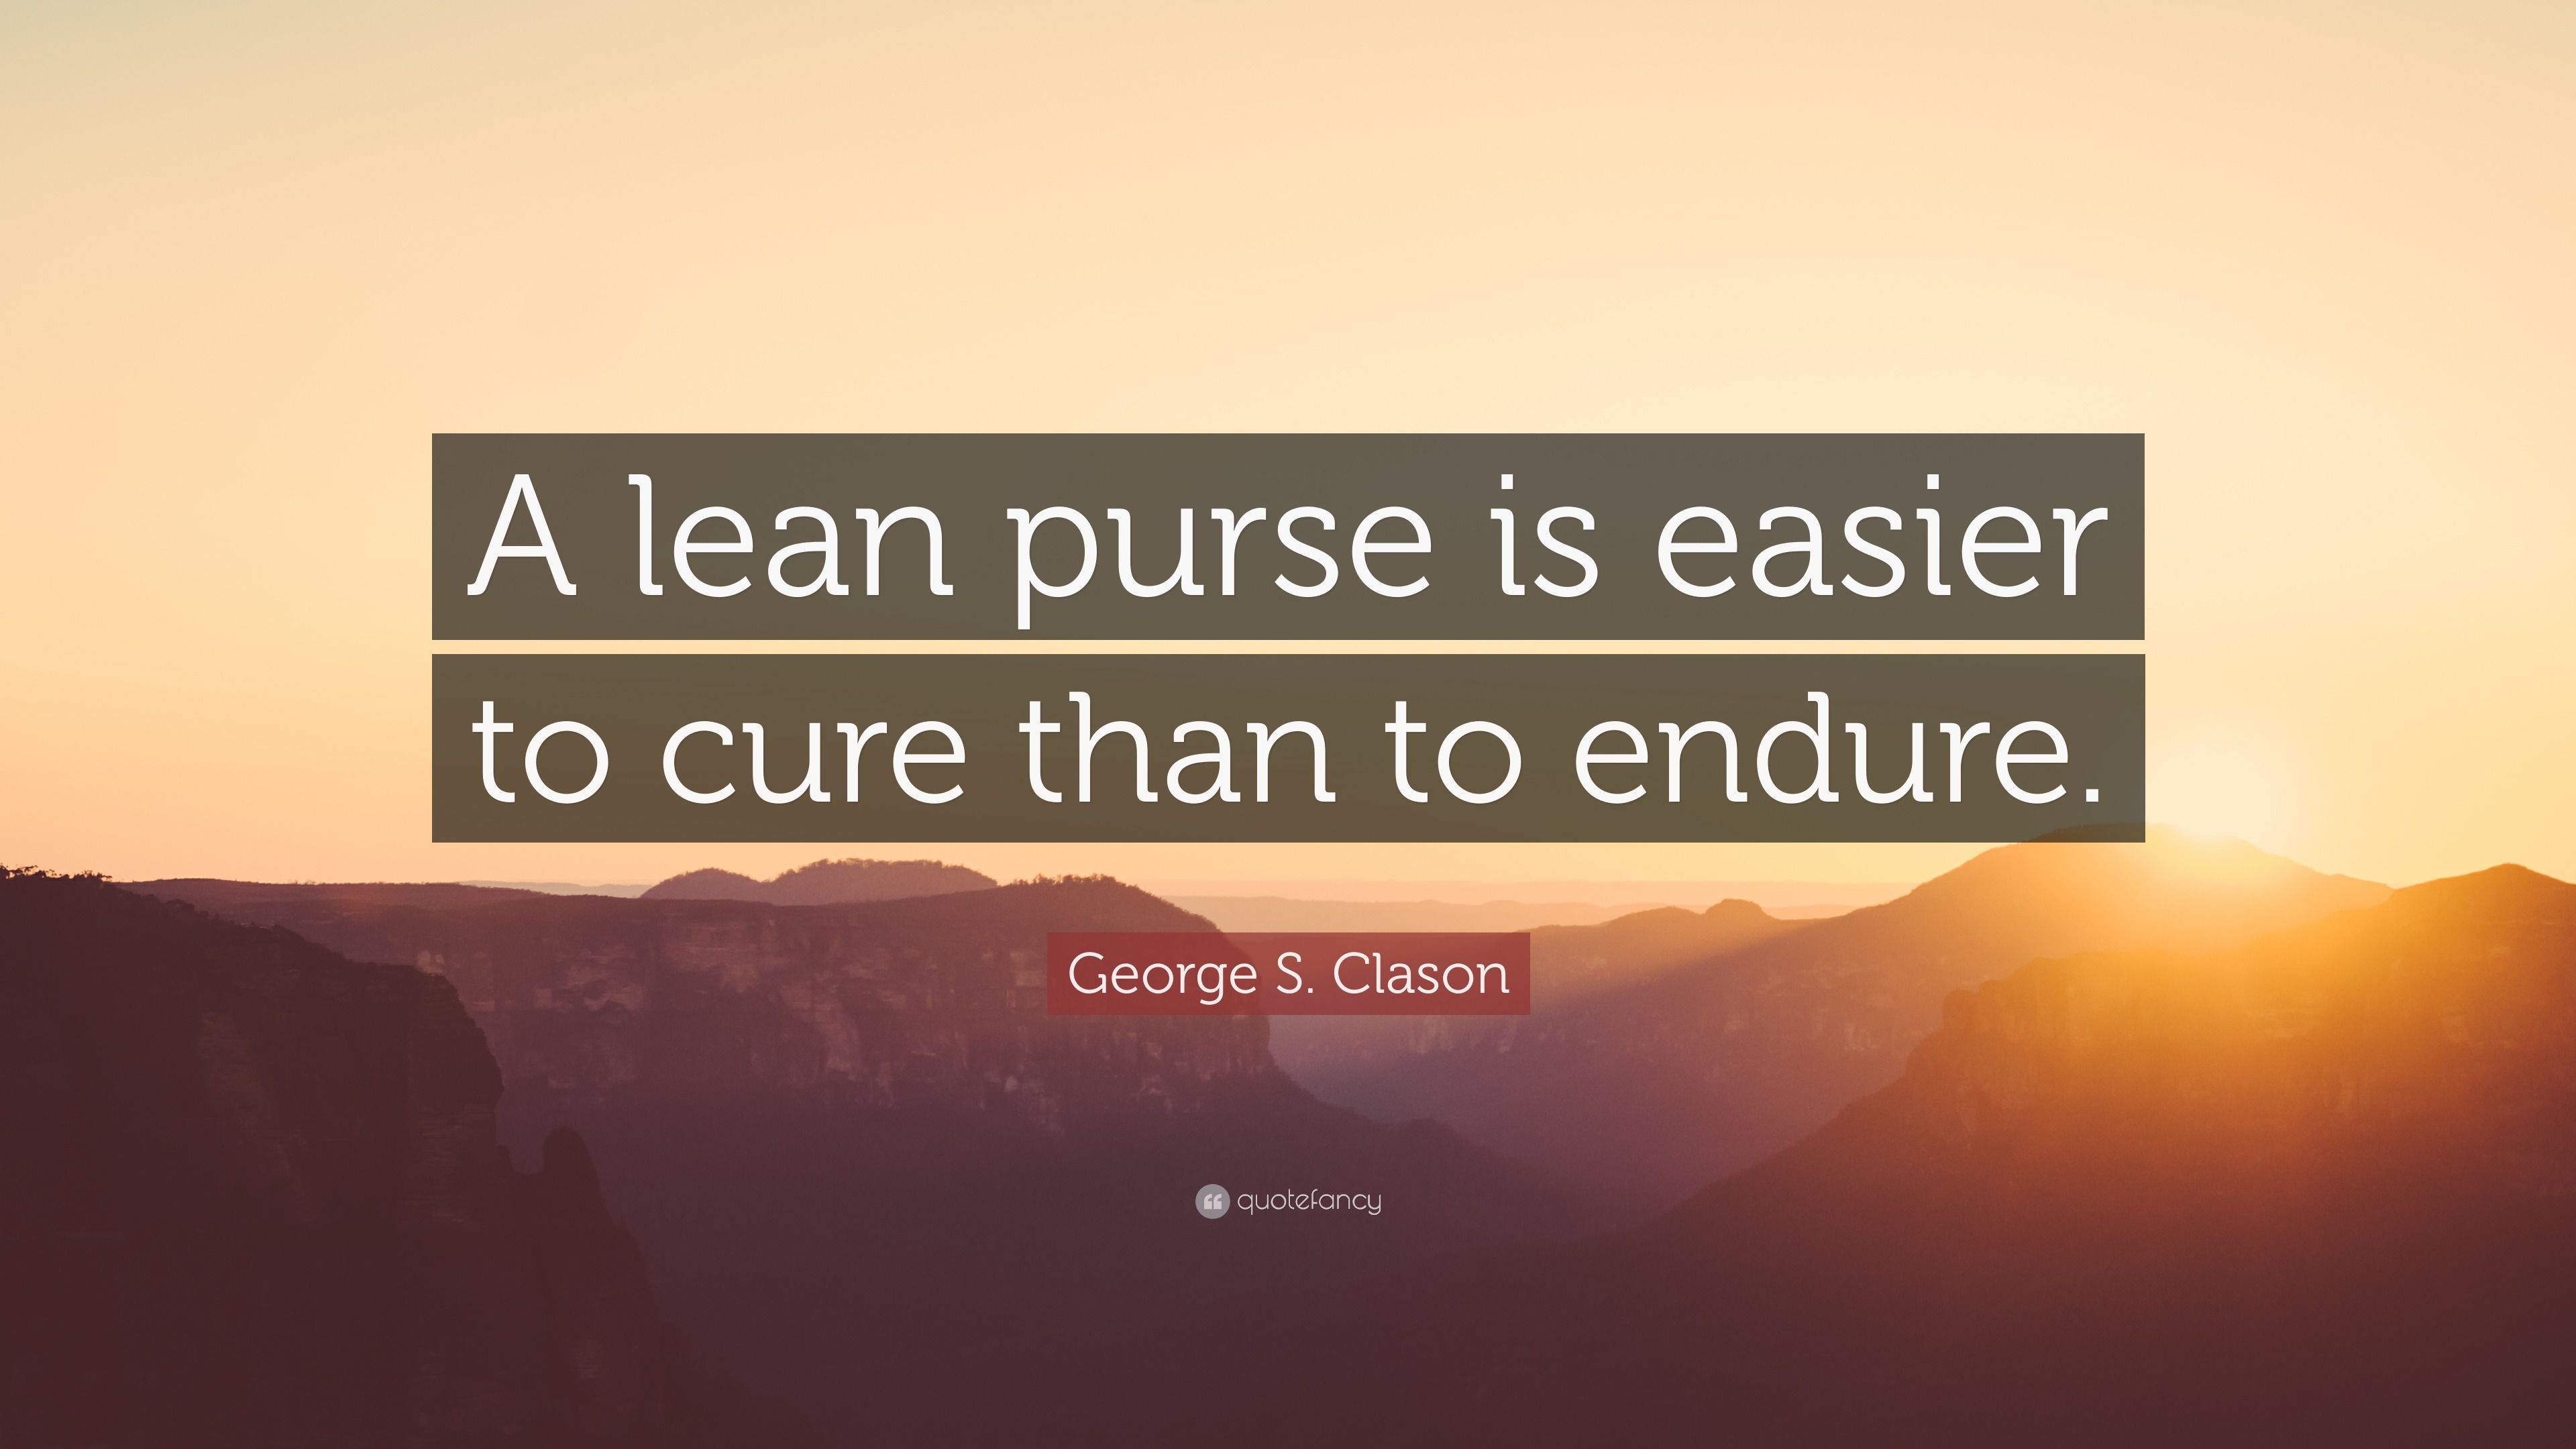 1160001 George S Clason Quote A lean purse is easier to cure than to